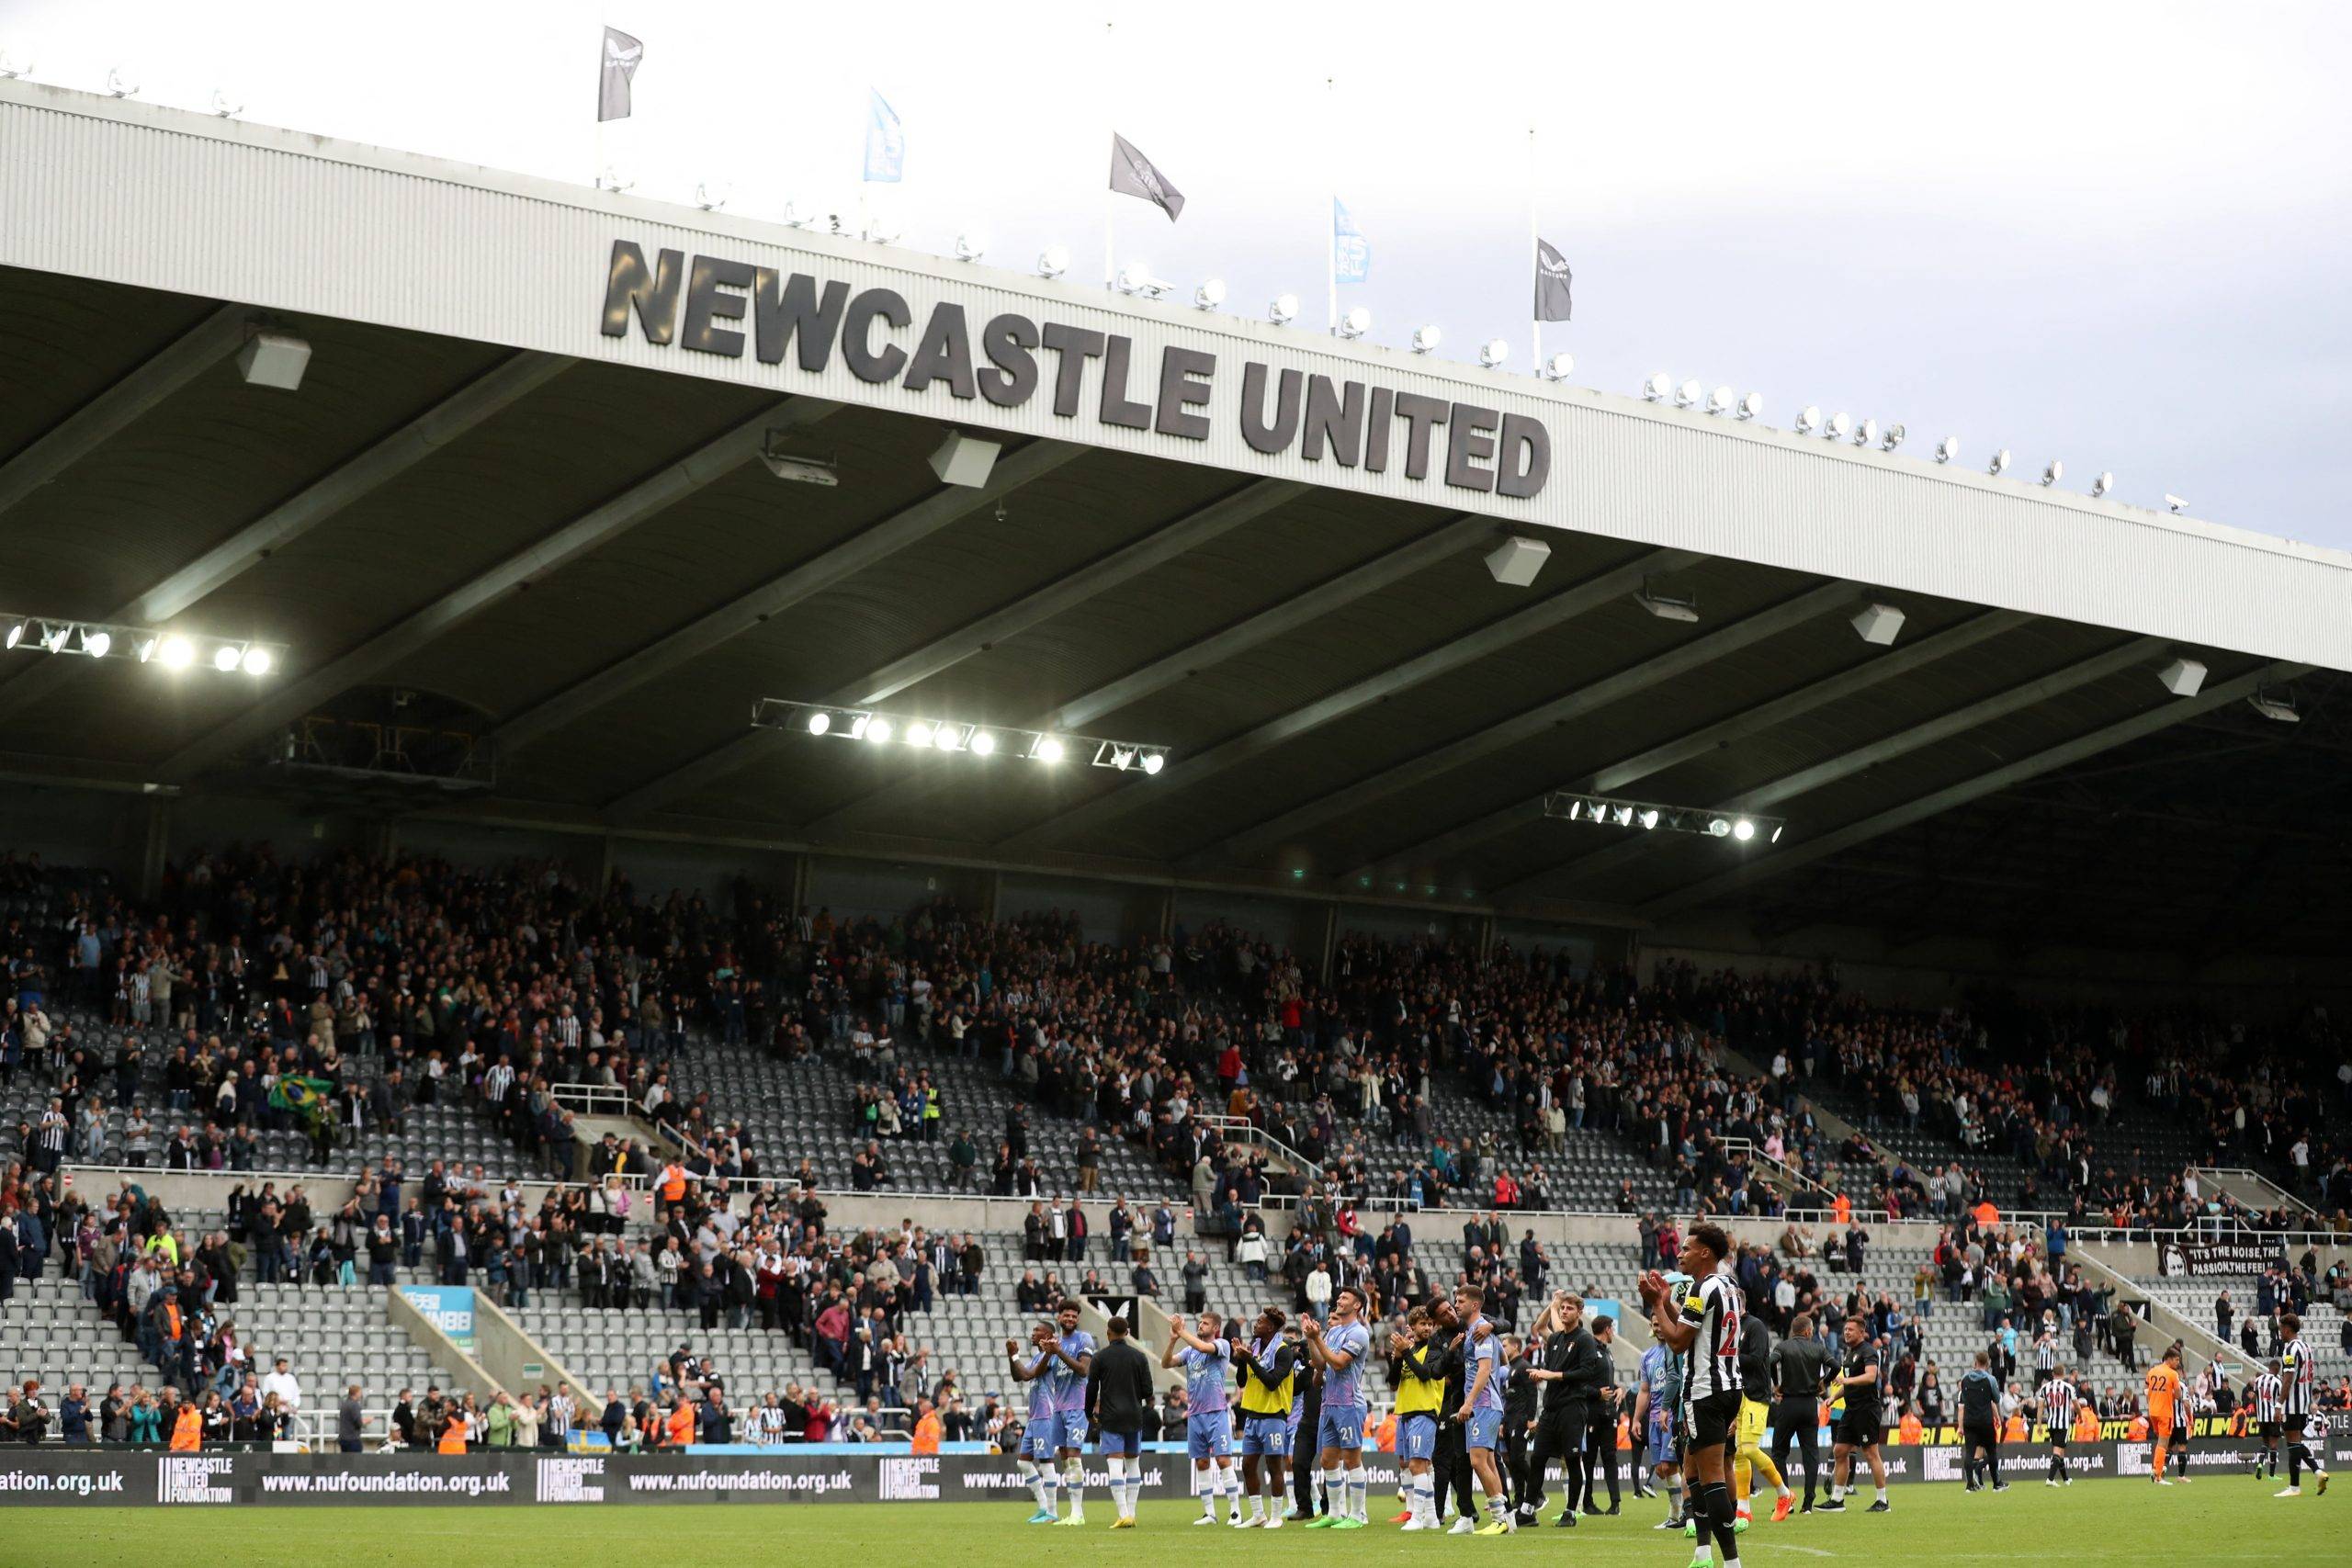 Newcastle may get £200m windfall from stadium naming rights - Newcastle United News